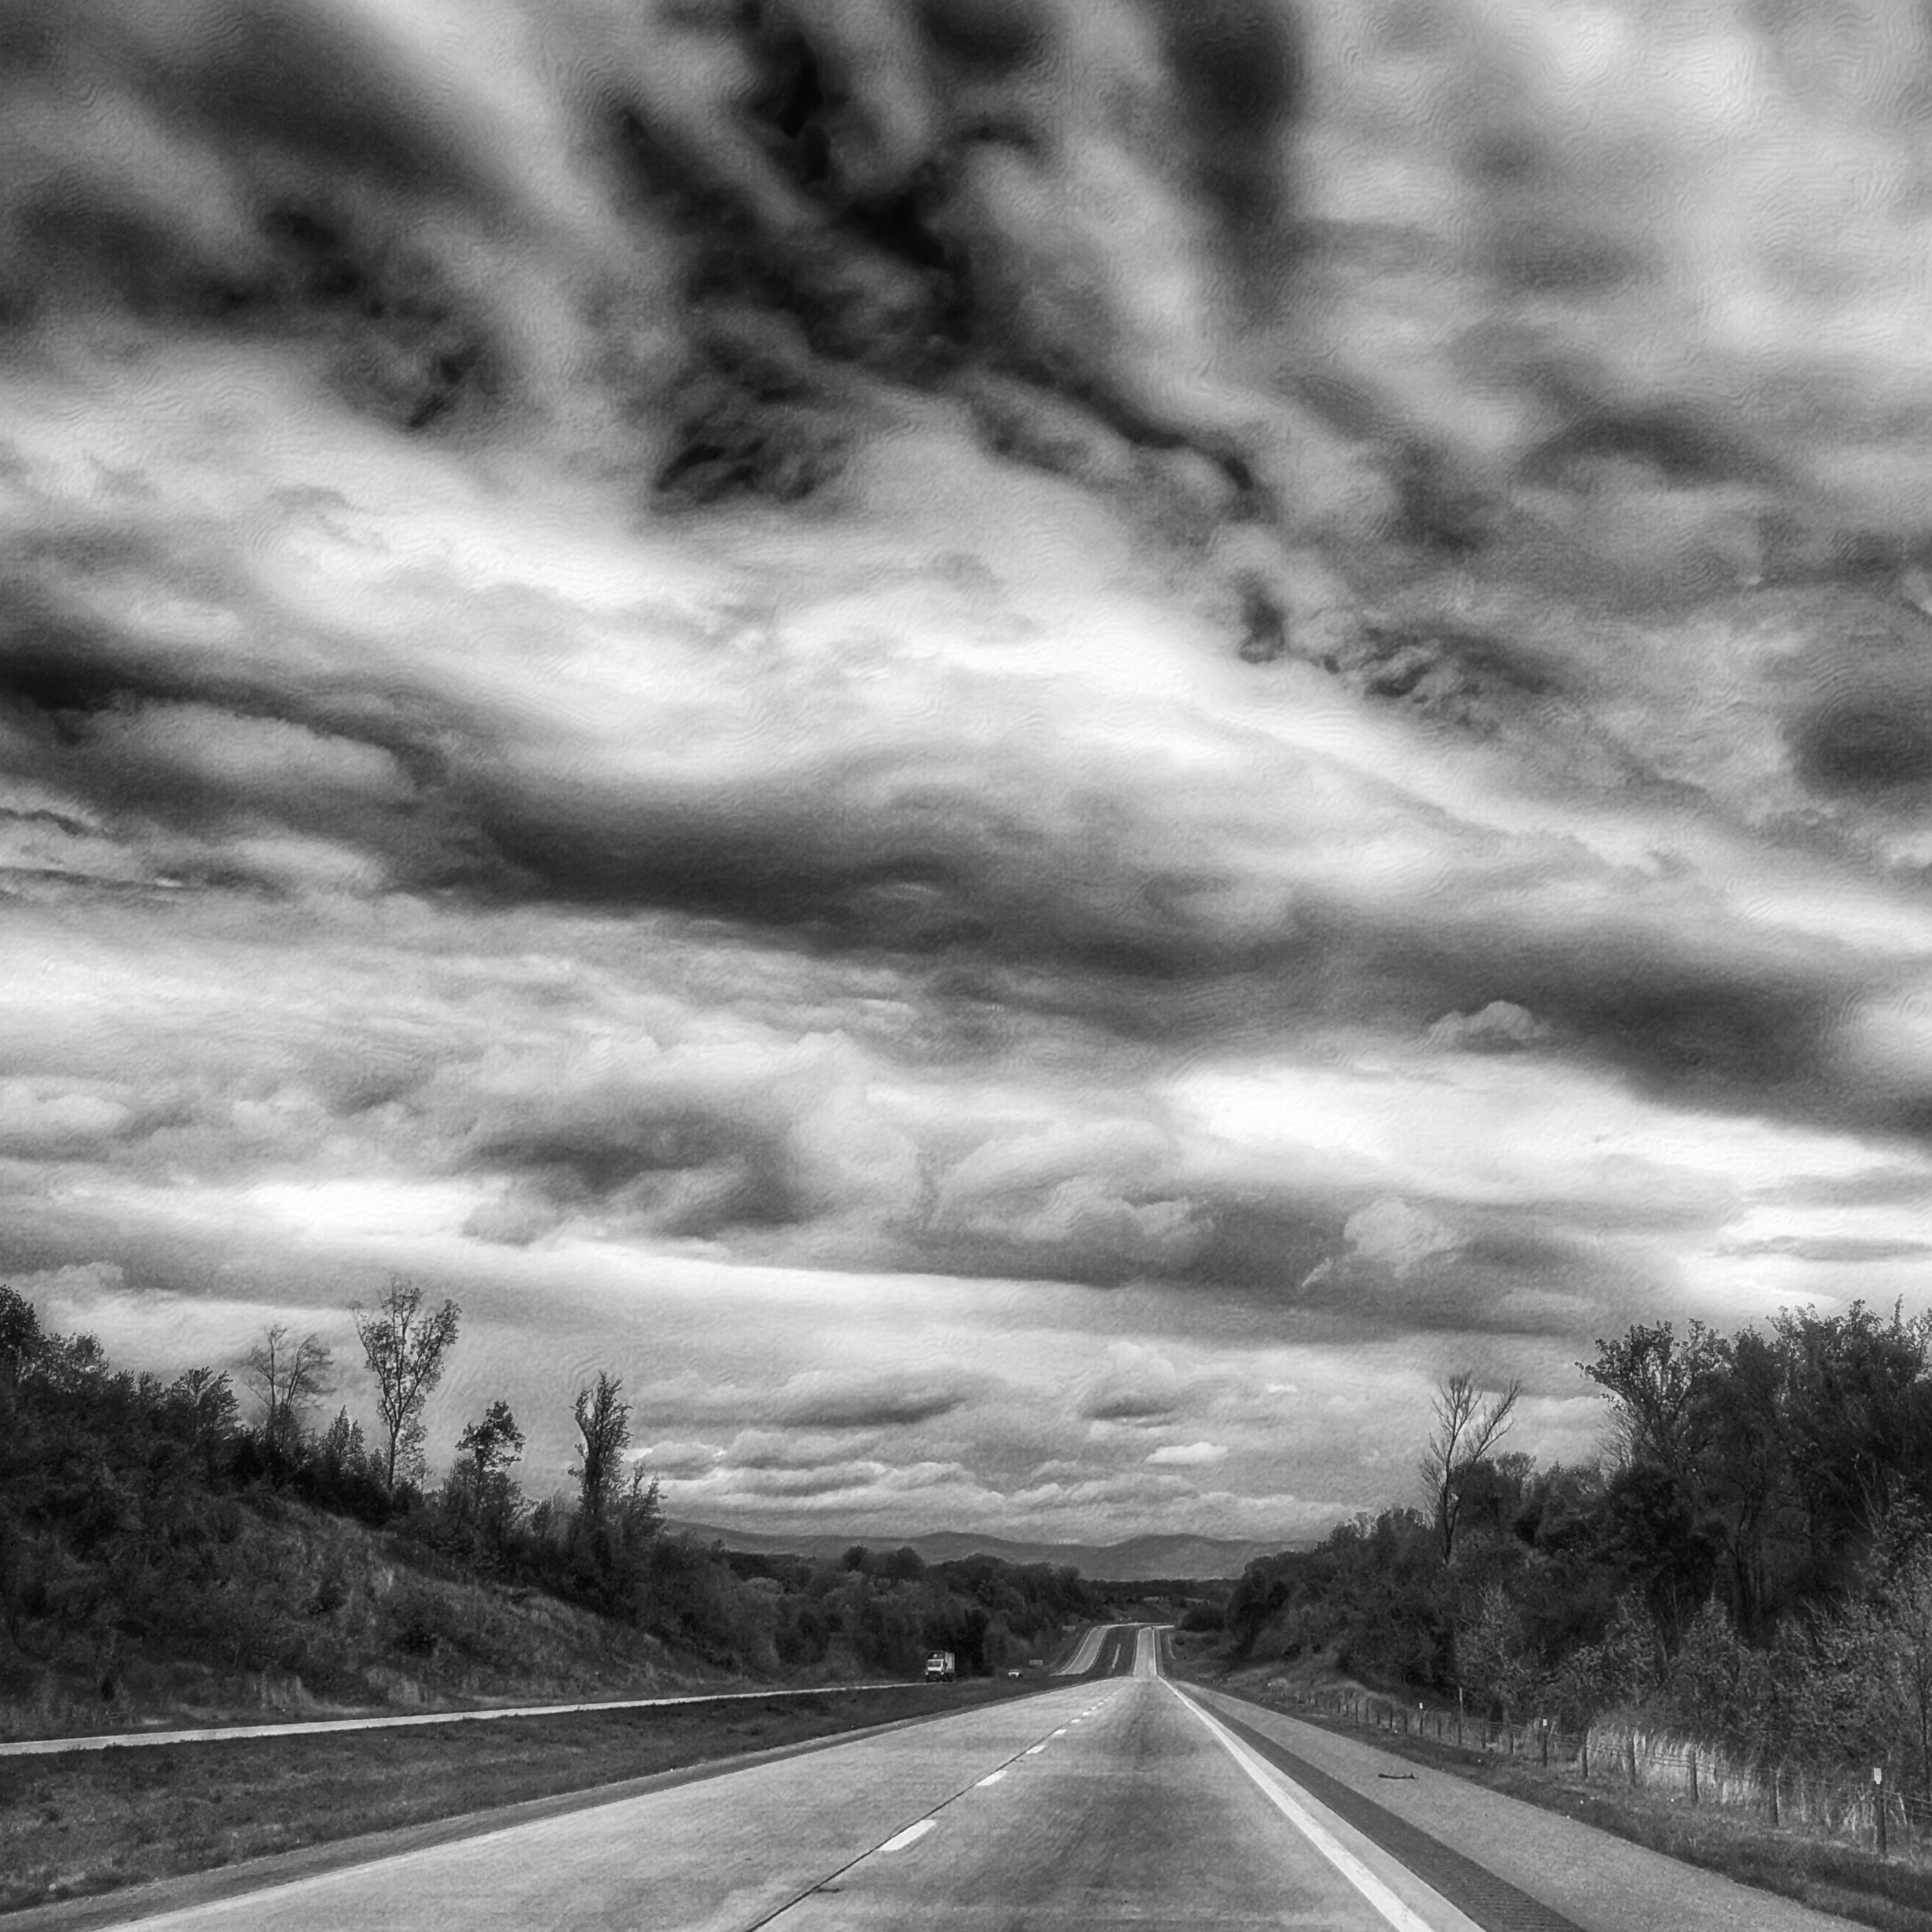 A black and white picture of an empty road on a cloudy day.